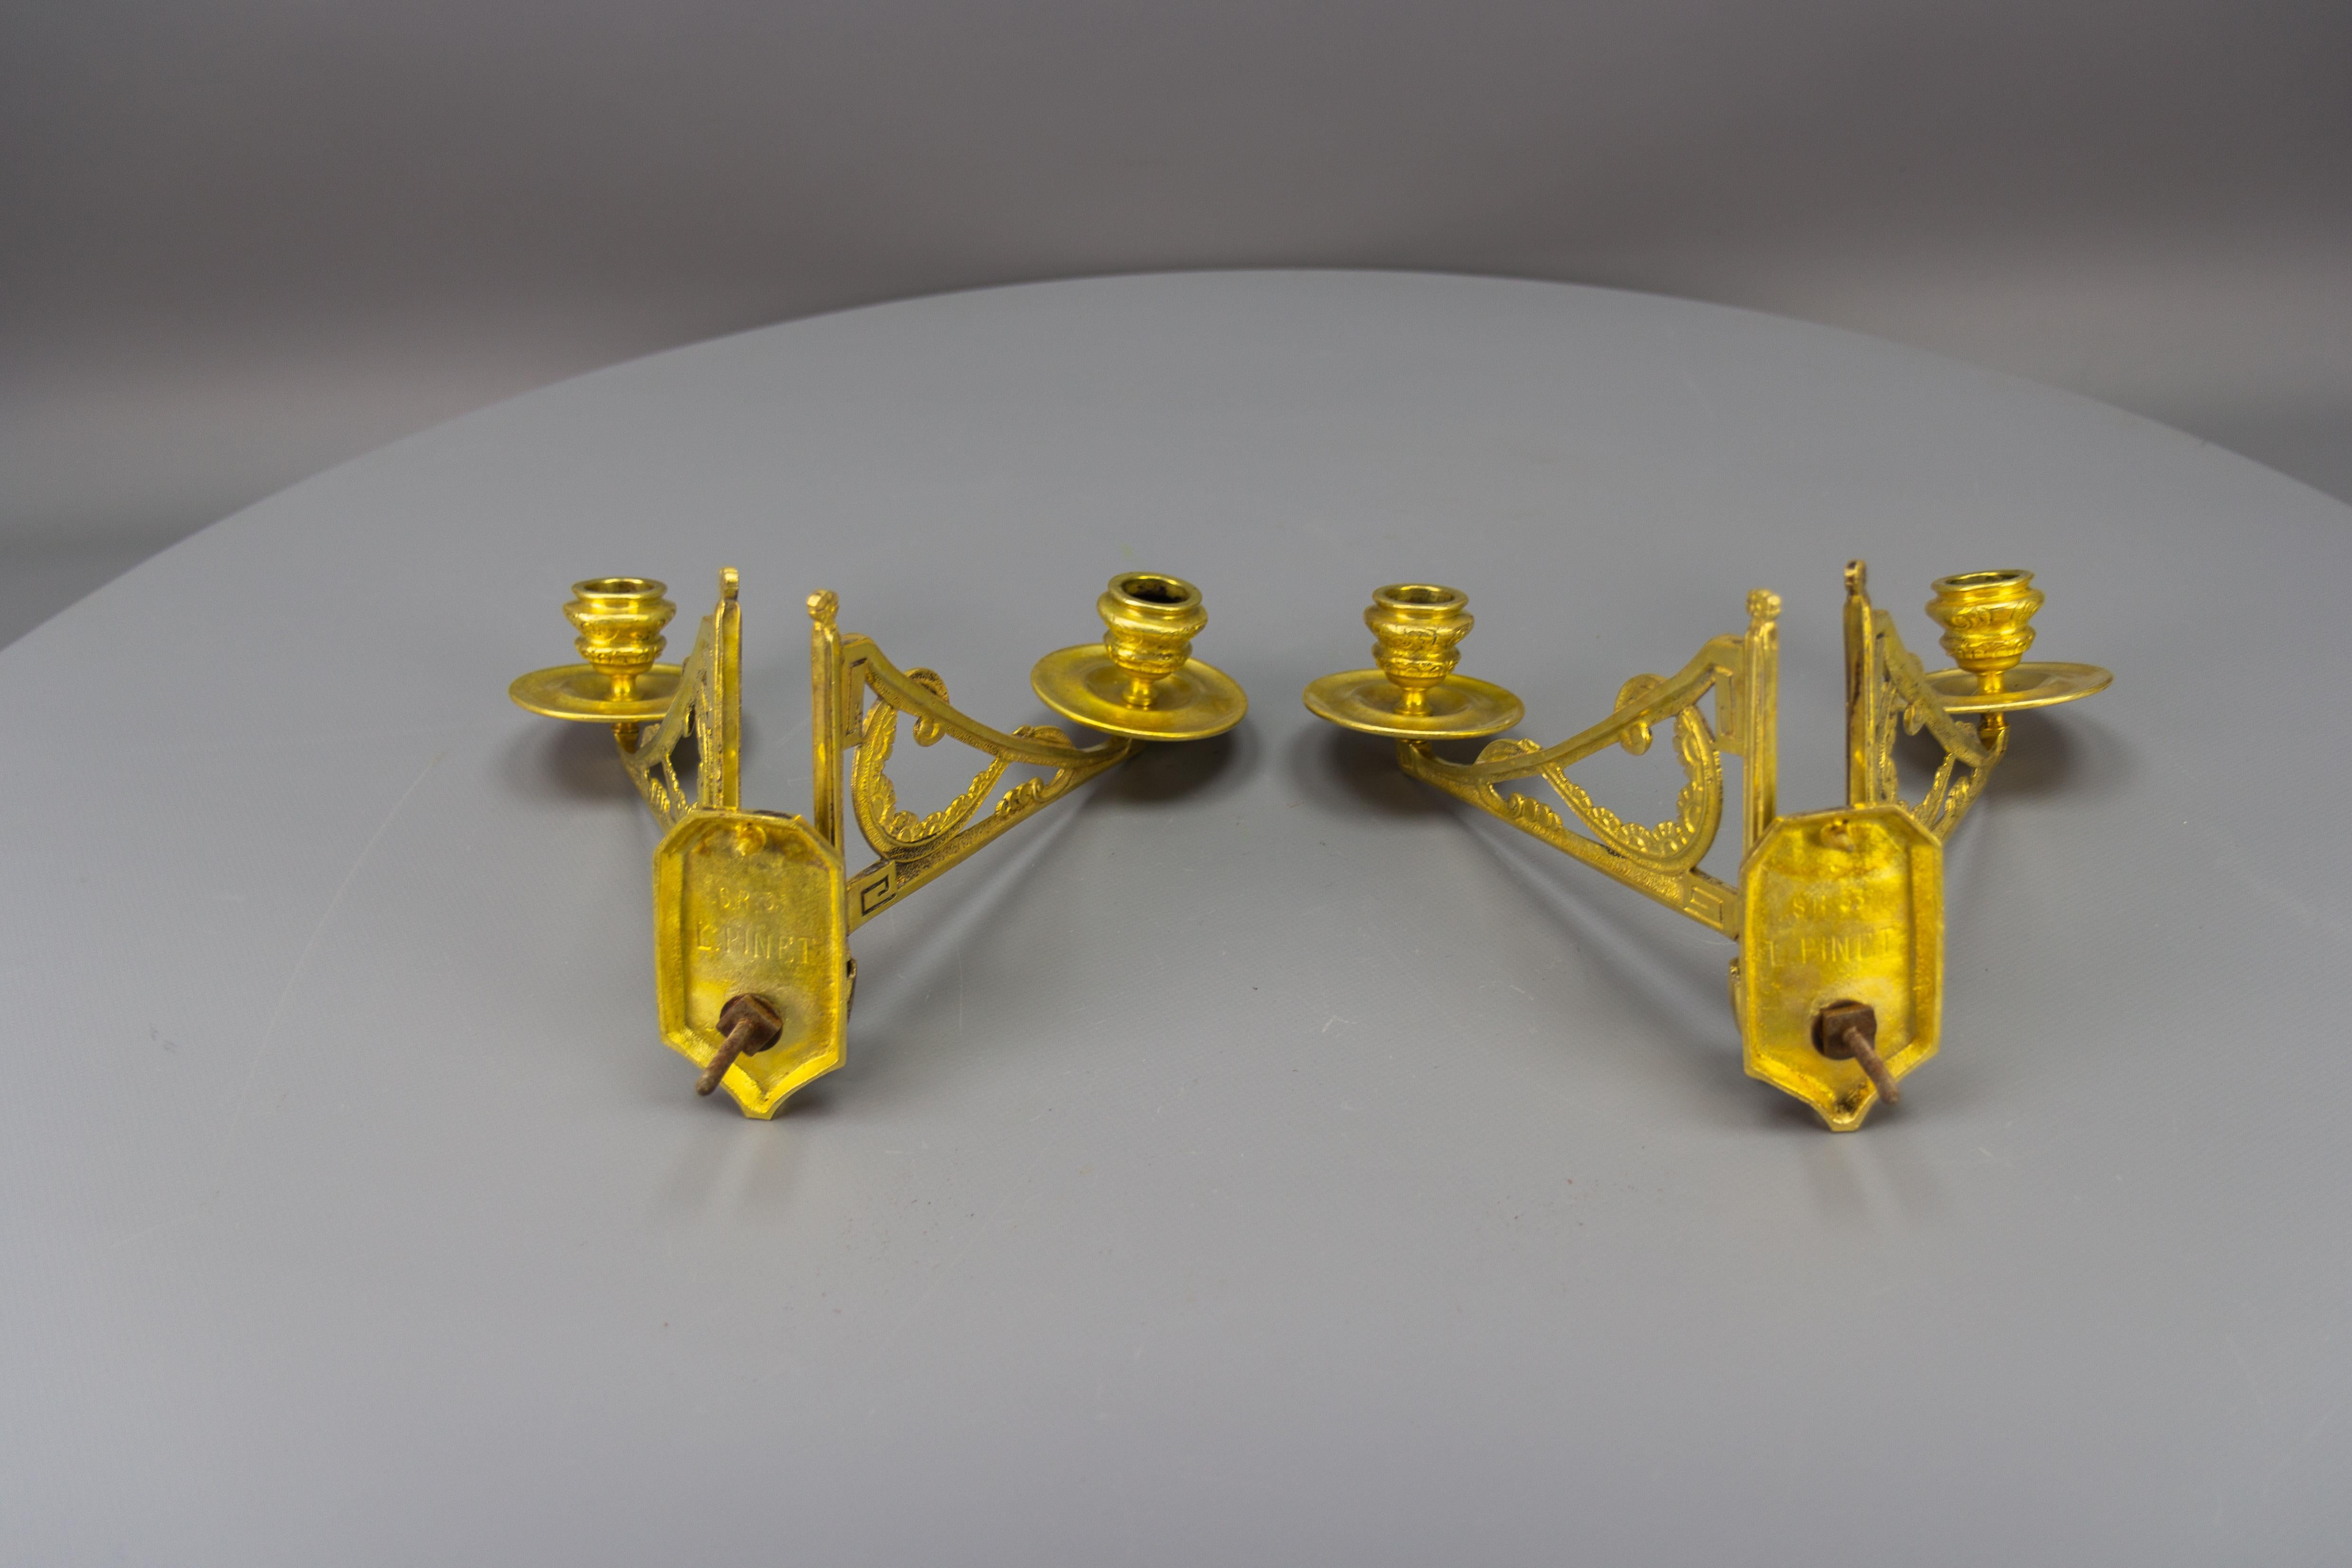 Pair of French Art Deco Brass Twin Arm Piano Candlestick Wall Lights by L. Pinet For Sale 3